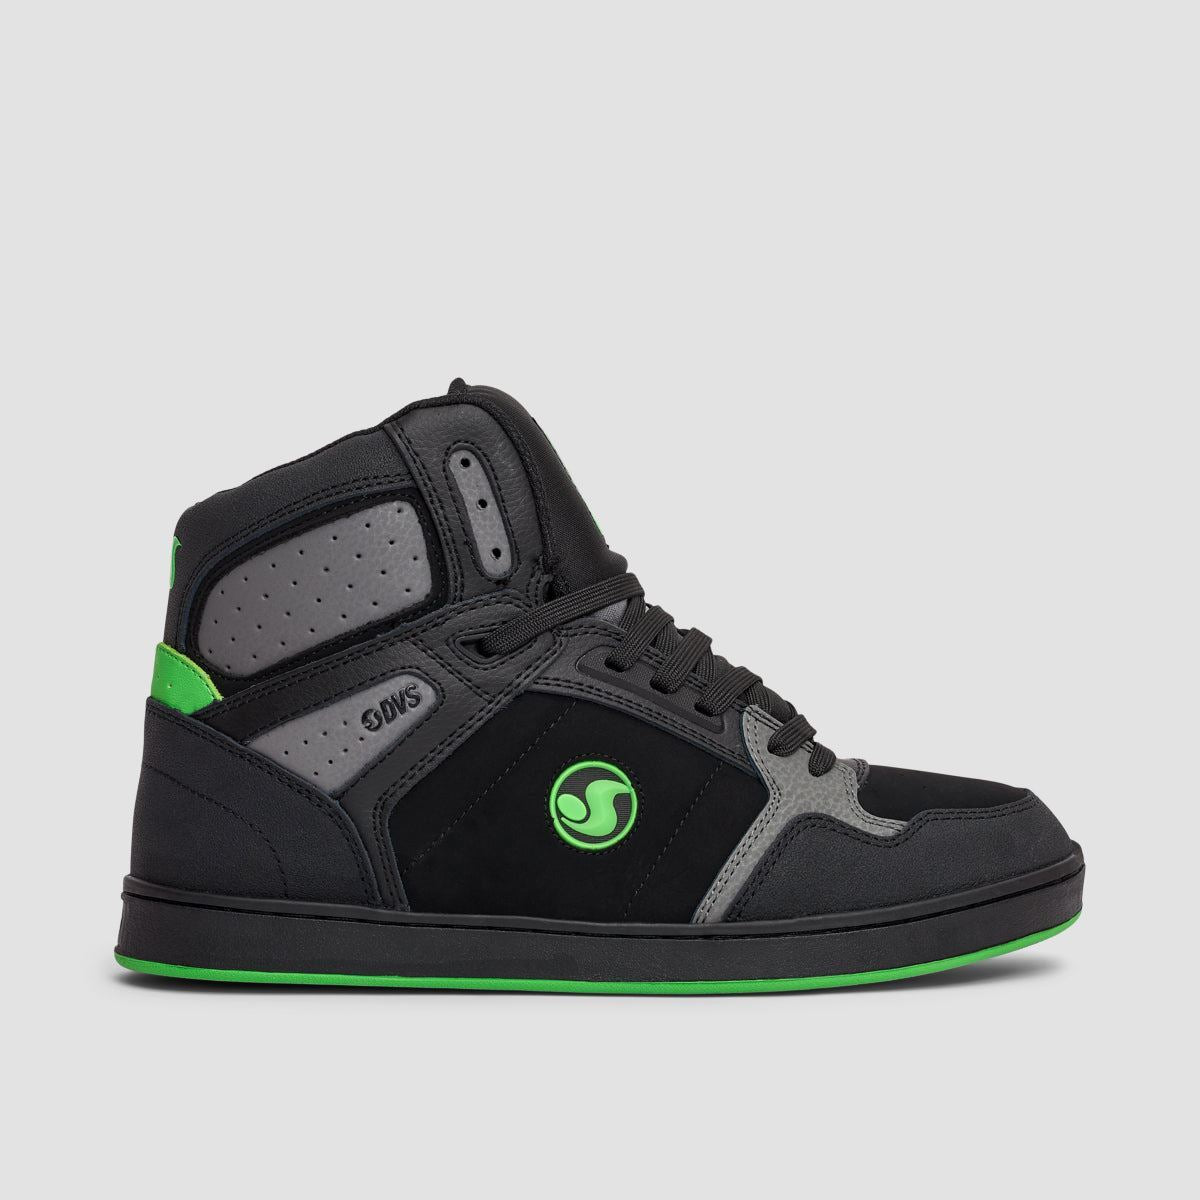 DVS Honcho High Top Shoes - Black/Charcoal/Lime Suede